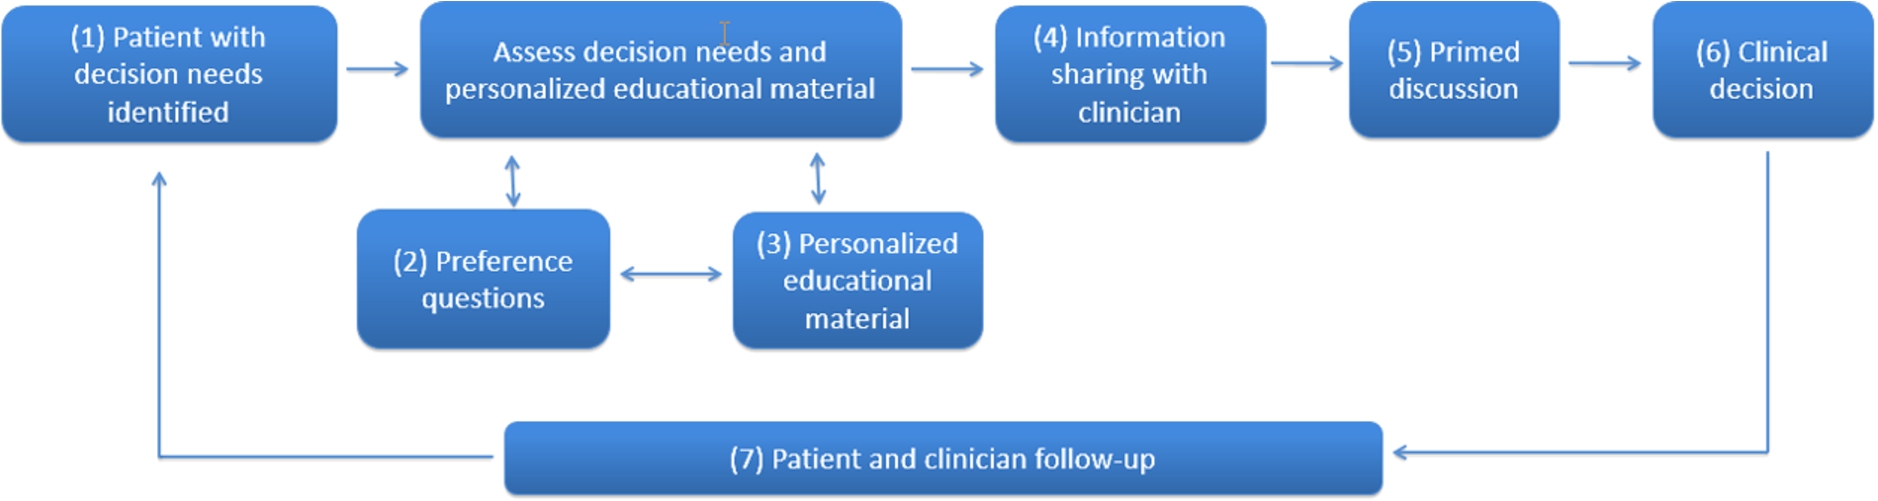 A workflow to better engage patients throughout their decision-making journeys. To better engage patients in their decisions, this workflow, which several practices programmed into their patient portal and electronic health record, guides patients and clinicians through a series of seven steps: (1) based on electronic health record data, patients with decision needs are identified, and the patient portal reaches contacts patients outside the confines of an office visit to start considering decision options; (2) the patient portal walks patients through an intake that assesses personal preferences, knowledge, needs, and readiness to make a decision; (3) the portal provides personalized educational material tailored to the patient’s stated preferences and decision stage; (4) the portal allows the patient to share their preferences and decision needs with their clinician; (5) the clinician reviews the information prior to a visit, priming the discussion so the clinician is aware of the patient’s needs; (6) the patient and clinicians are able to make a more informed and shared decision; and (7) the electronic health record and patient portal can follow-up with both the clinician and patient to make sure the decision is acted upon consistent with the patient’s wishes (modified from [43]).